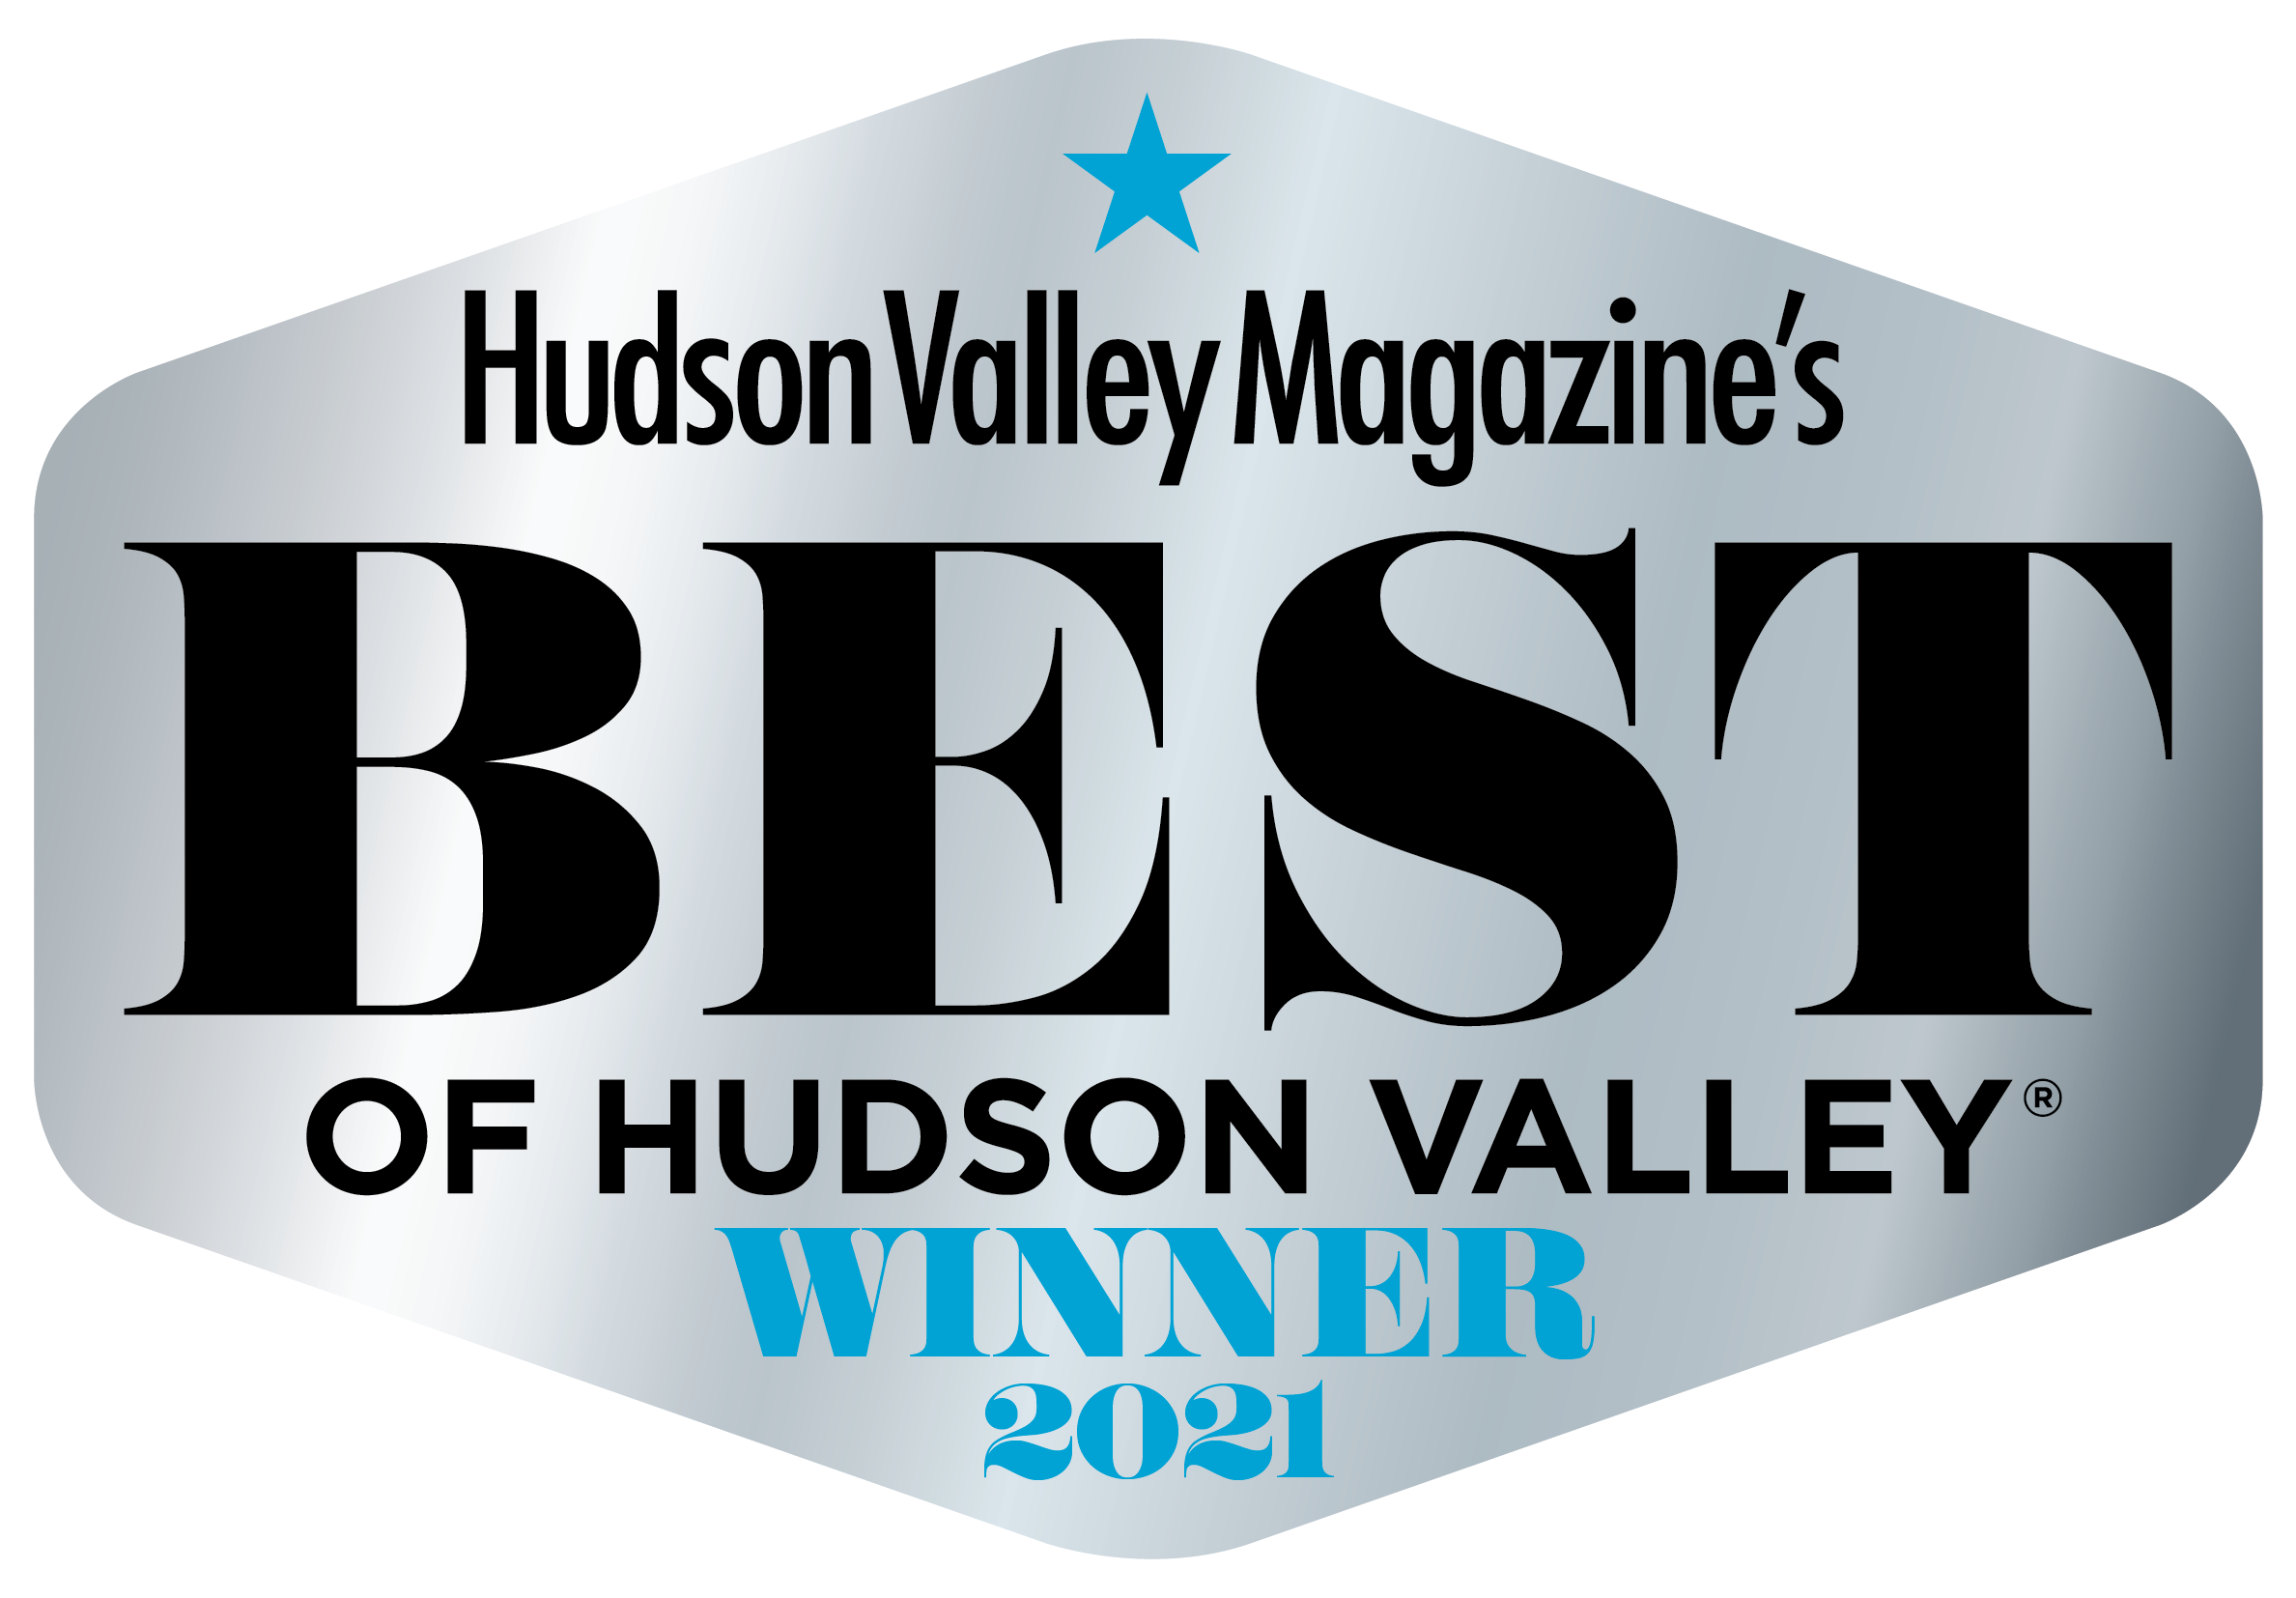 Flex Physical Therapy named Best Physical Therapists of Hudson Valley Winner 2021.